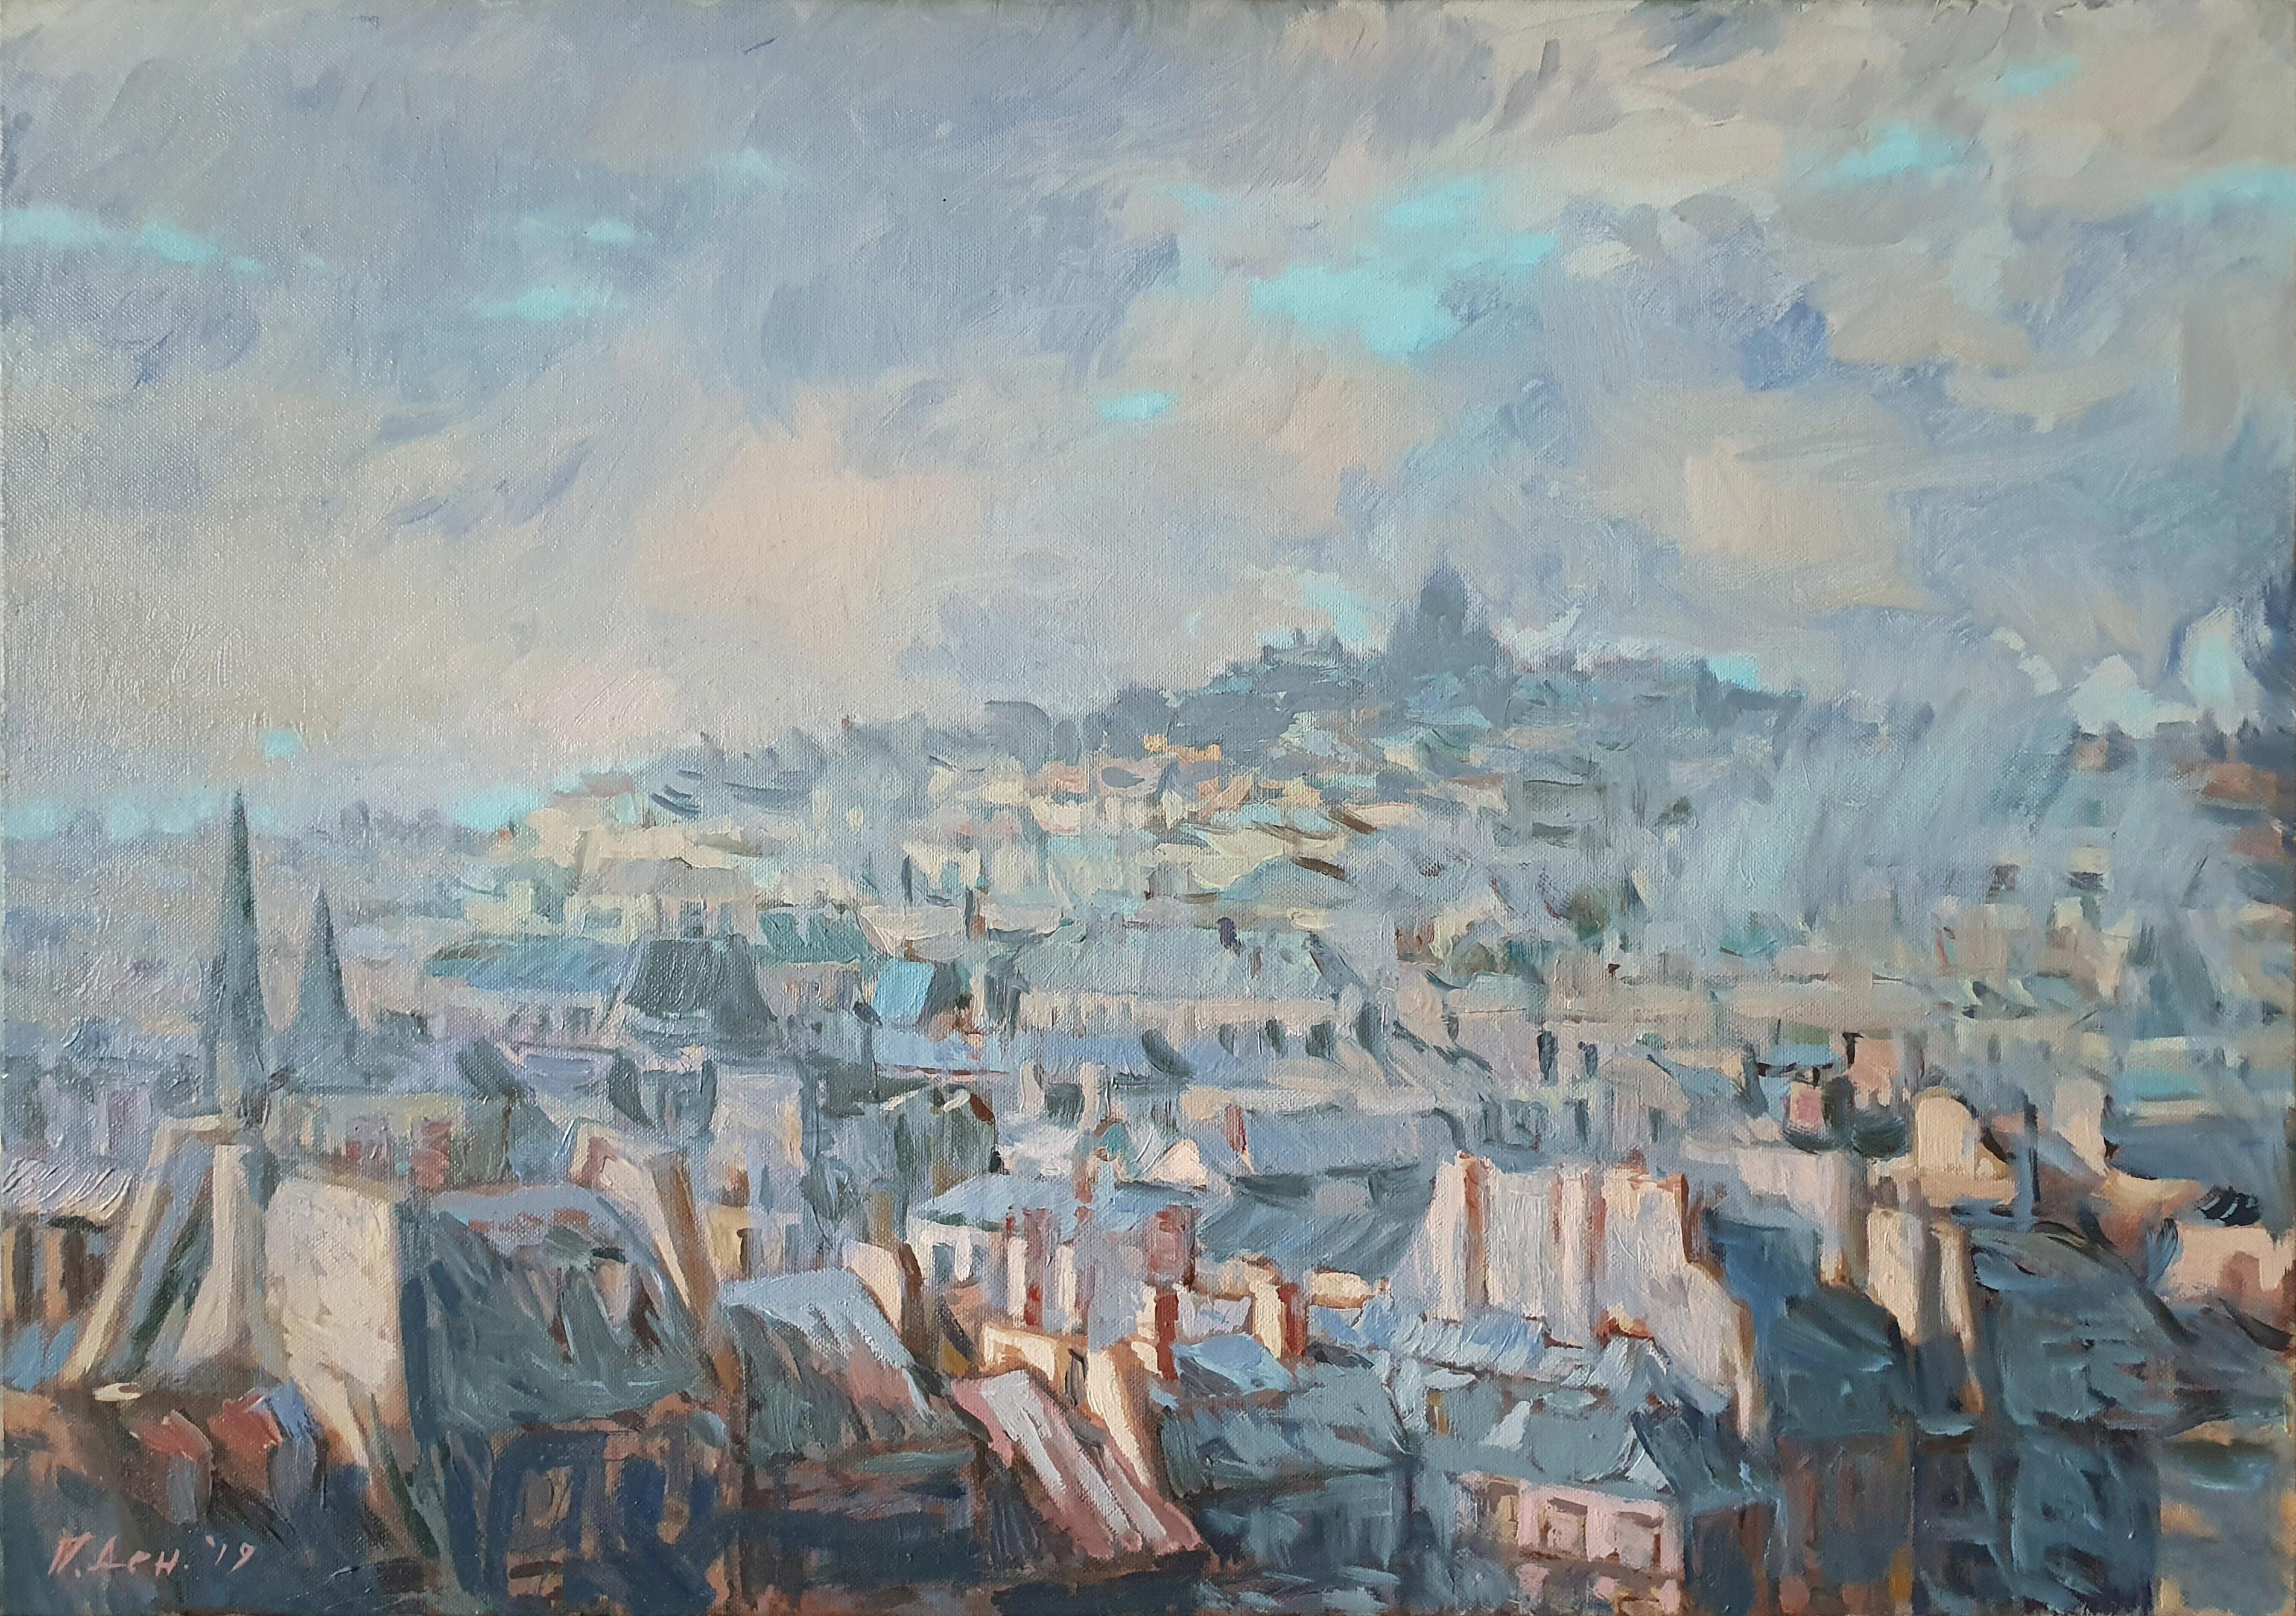 Petya Deneva Landscape Painting - Paris In Clouds - Oil Painting Colors White Yellow Blue Brown Green